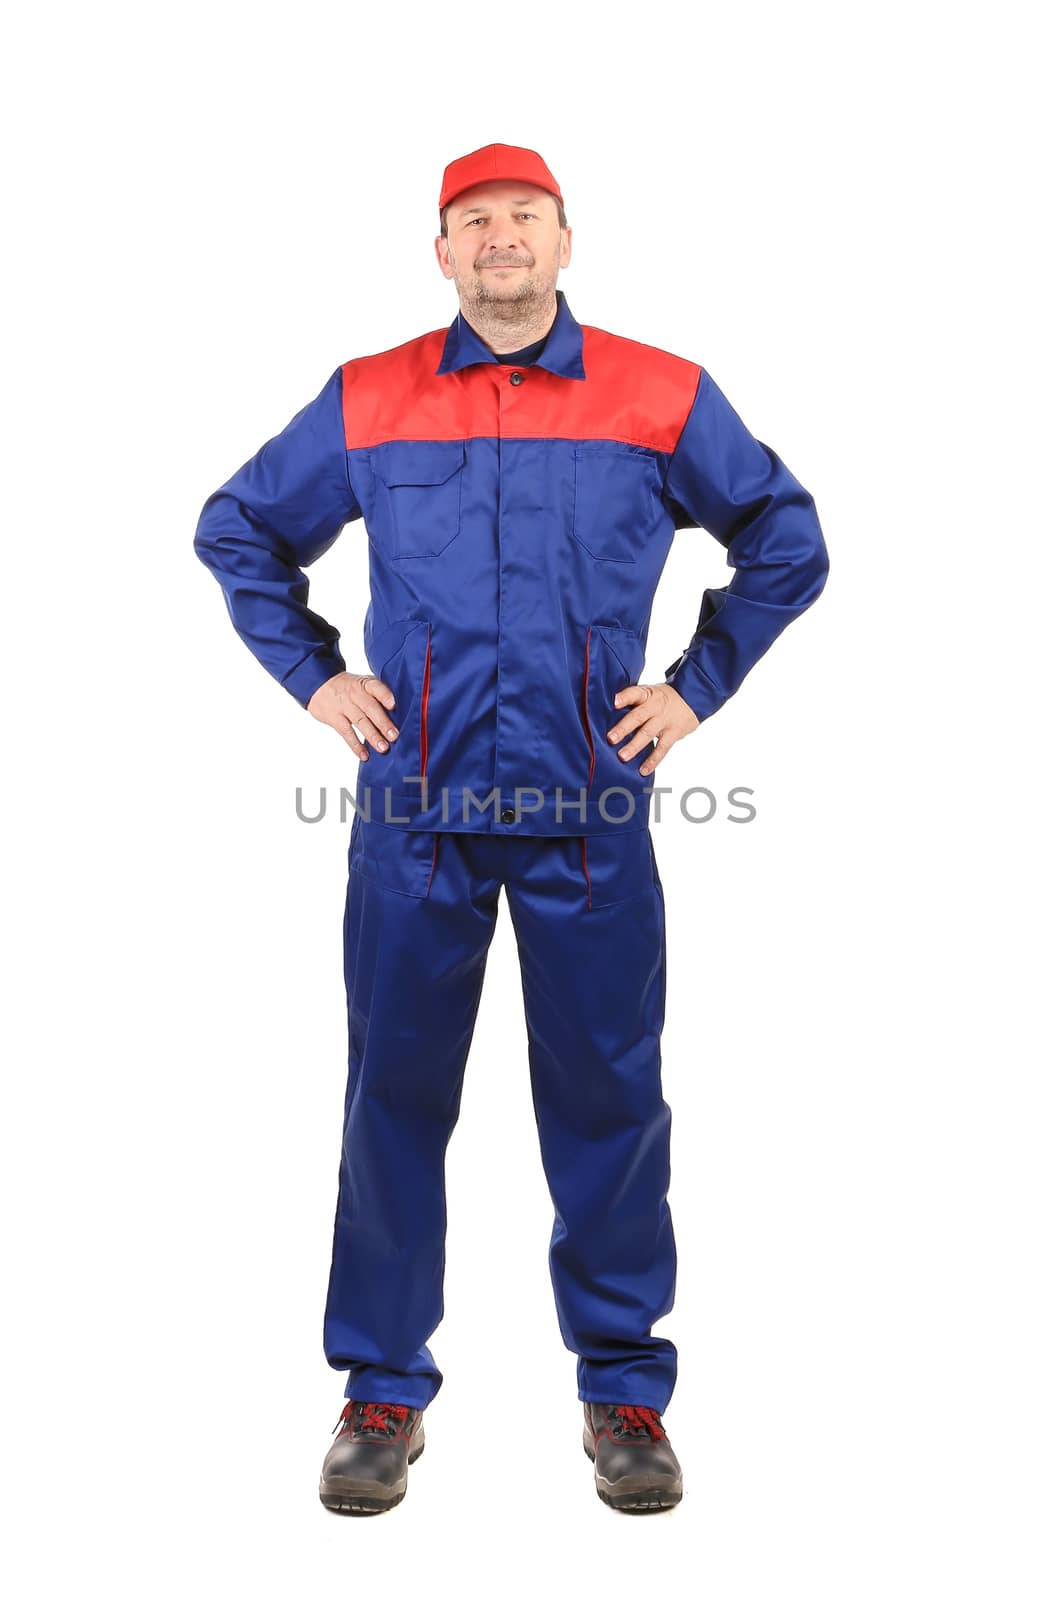 Worker inred-blue workwear. Isolated on a white background.